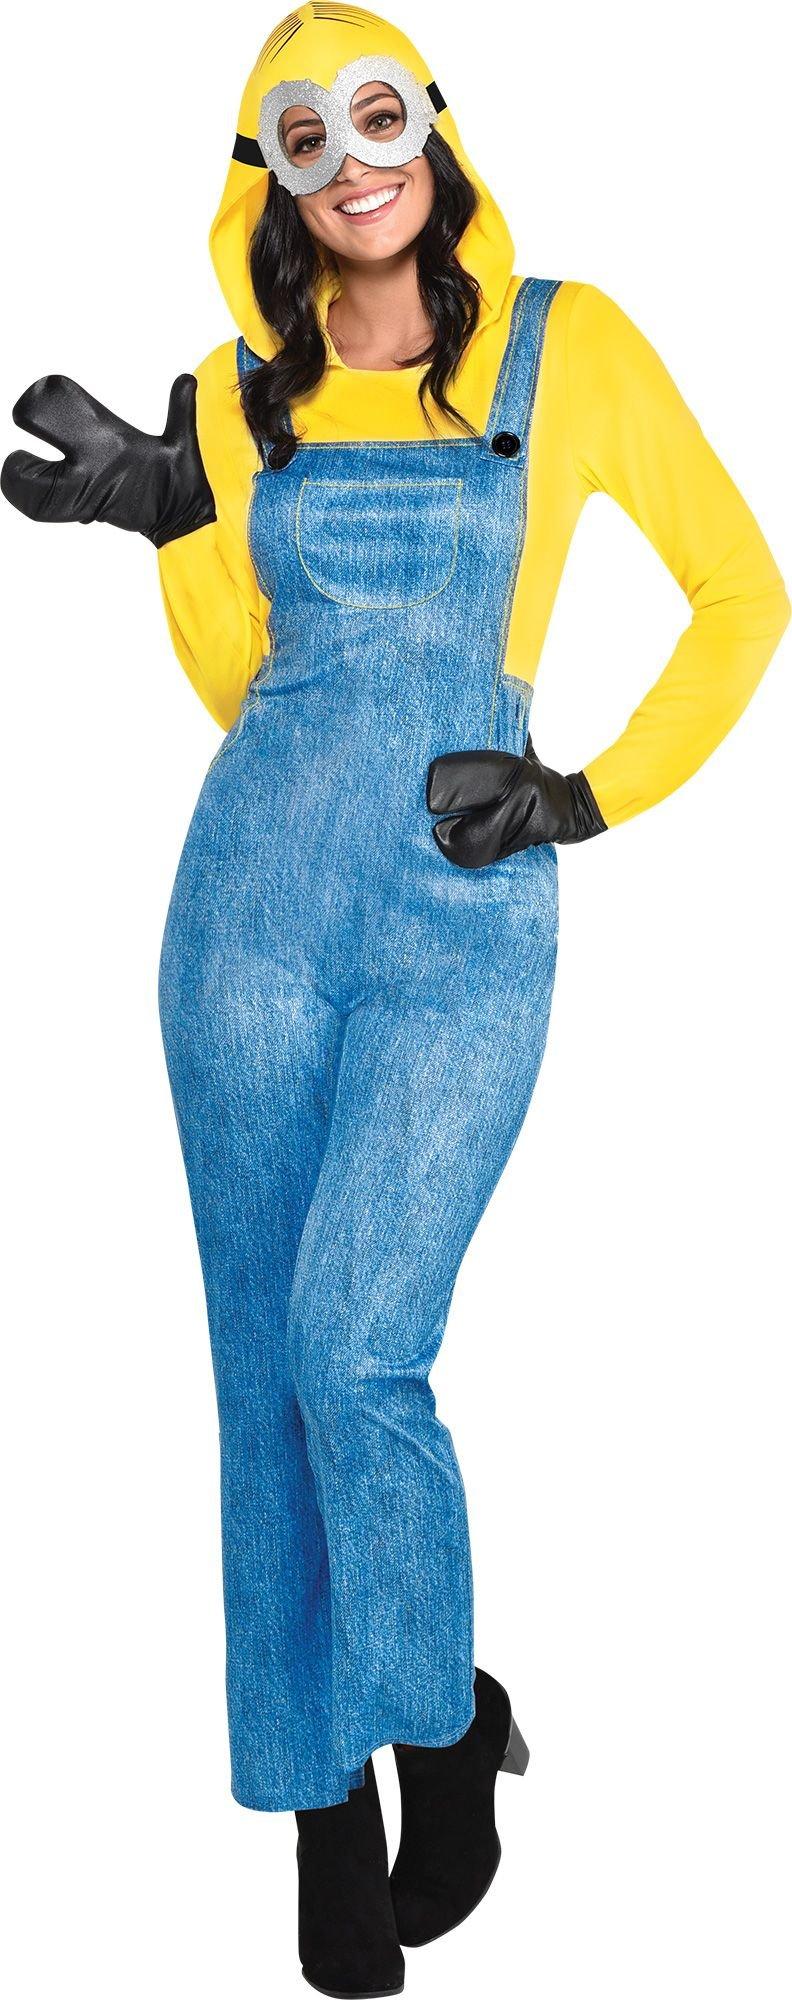 Despicable Me & Minion Costumes for Adults & Kids